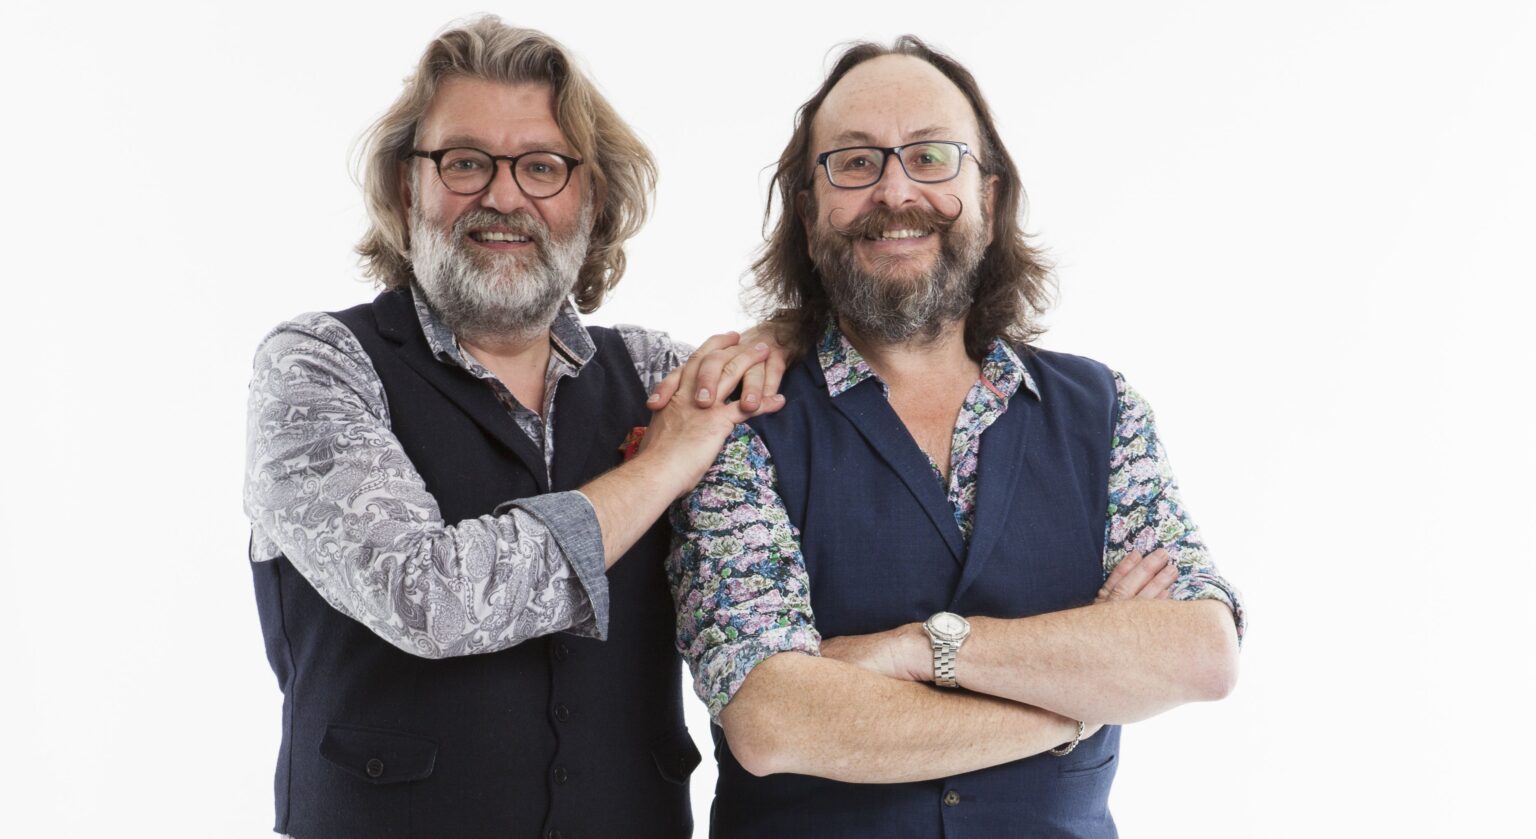 Hairy Bikers star Si King cooks up a storm at Southport Flower Show